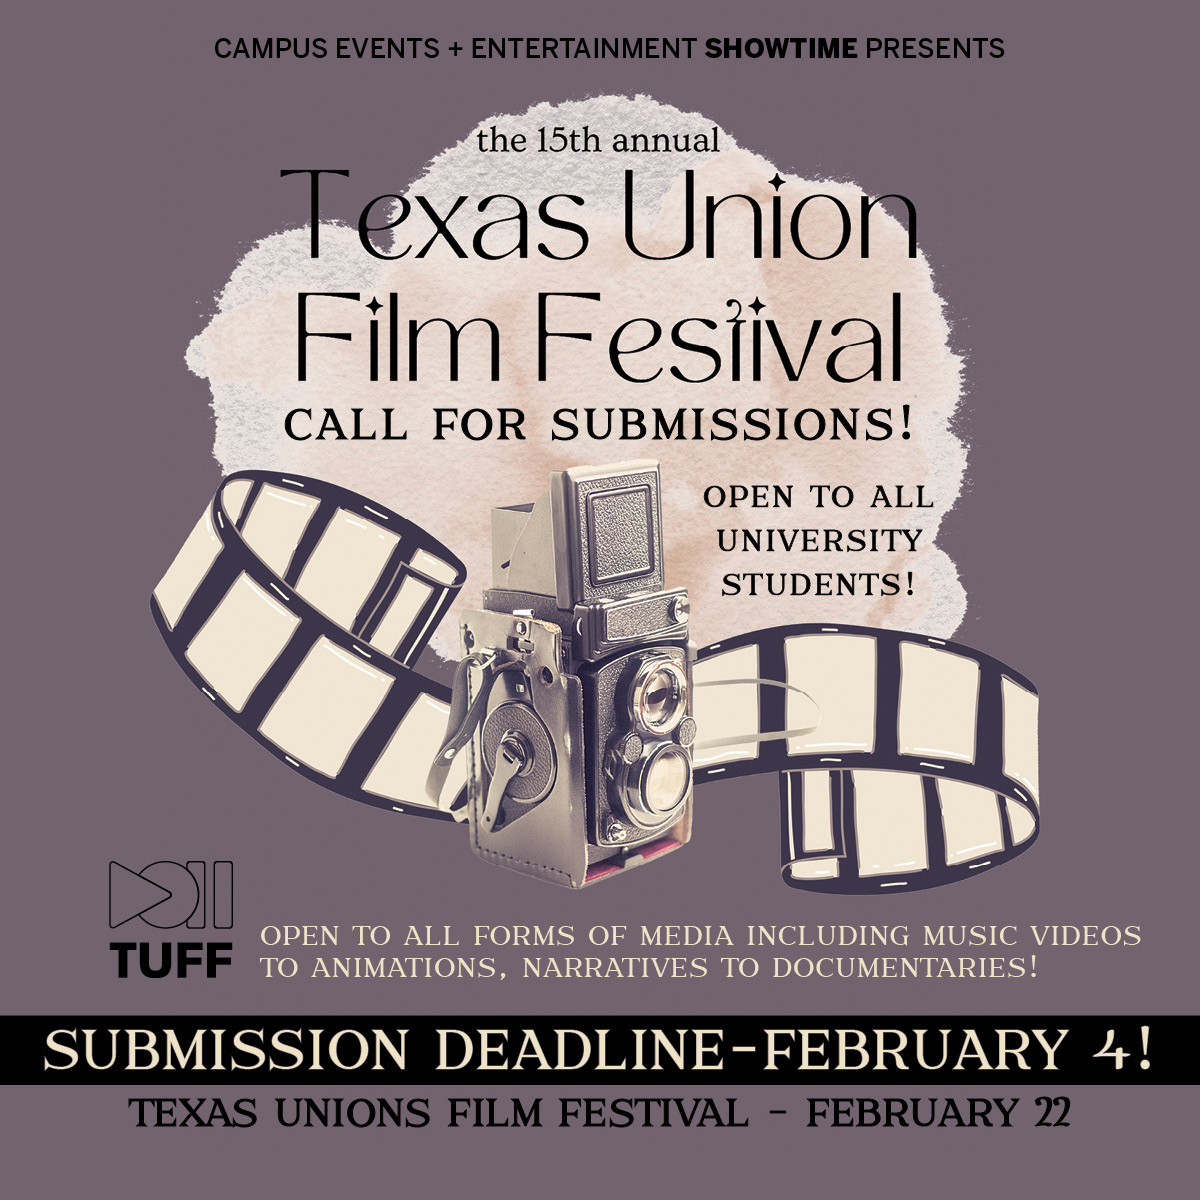 A gray background with a white cloud and an old school camera and film are in the middle with the words "The 15th Annual Texas Union Film Festival call for submissions! Open to all University students!" Underneath the camera and fillm the words in white say "Open to all forms of media including music videos to animations, narratives to documentaries!" Under that line is a black bar with white letters that say Submission Deadline February 4th. Underneath in black letters say Texas Unions Film Festival Feb 22